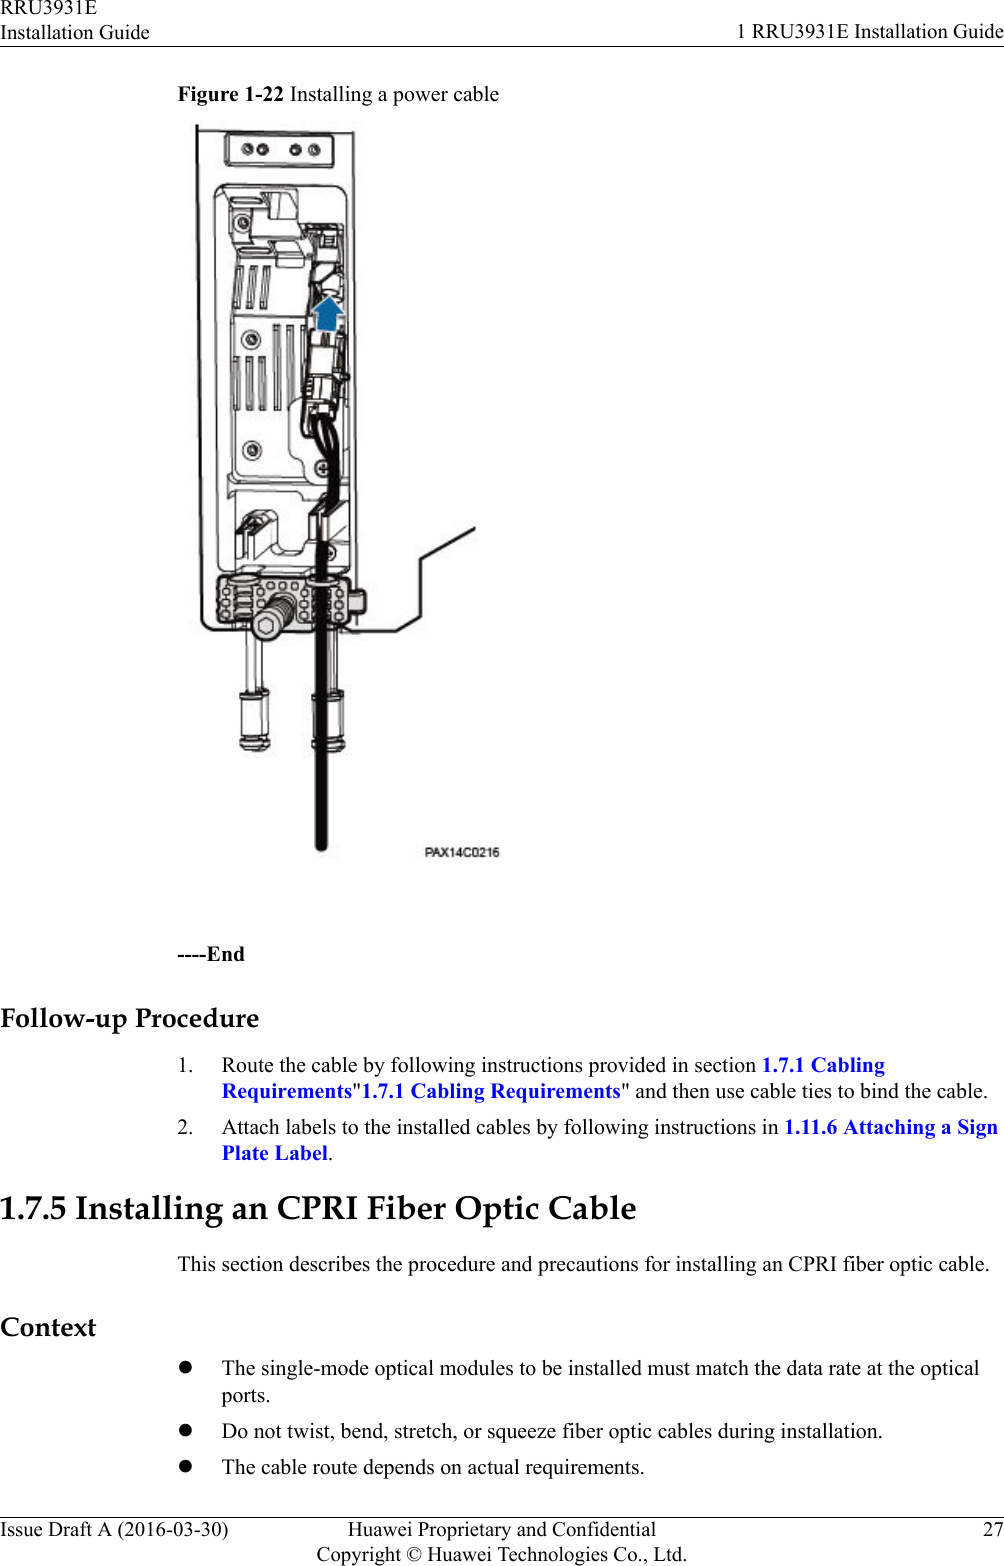 Figure 1-22 Installing a power cable----EndFollow-up Procedure1. Route the cable by following instructions provided in section 1.7.1 CablingRequirements&quot;1.7.1 Cabling Requirements&quot; and then use cable ties to bind the cable.2. Attach labels to the installed cables by following instructions in 1.11.6 Attaching a SignPlate Label.1.7.5 Installing an CPRI Fiber Optic CableThis section describes the procedure and precautions for installing an CPRI fiber optic cable.ContextlThe single-mode optical modules to be installed must match the data rate at the opticalports.lDo not twist, bend, stretch, or squeeze fiber optic cables during installation.lThe cable route depends on actual requirements.RRU3931EInstallation Guide 1 RRU3931E Installation GuideIssue Draft A (2016-03-30) Huawei Proprietary and ConfidentialCopyright © Huawei Technologies Co., Ltd.27